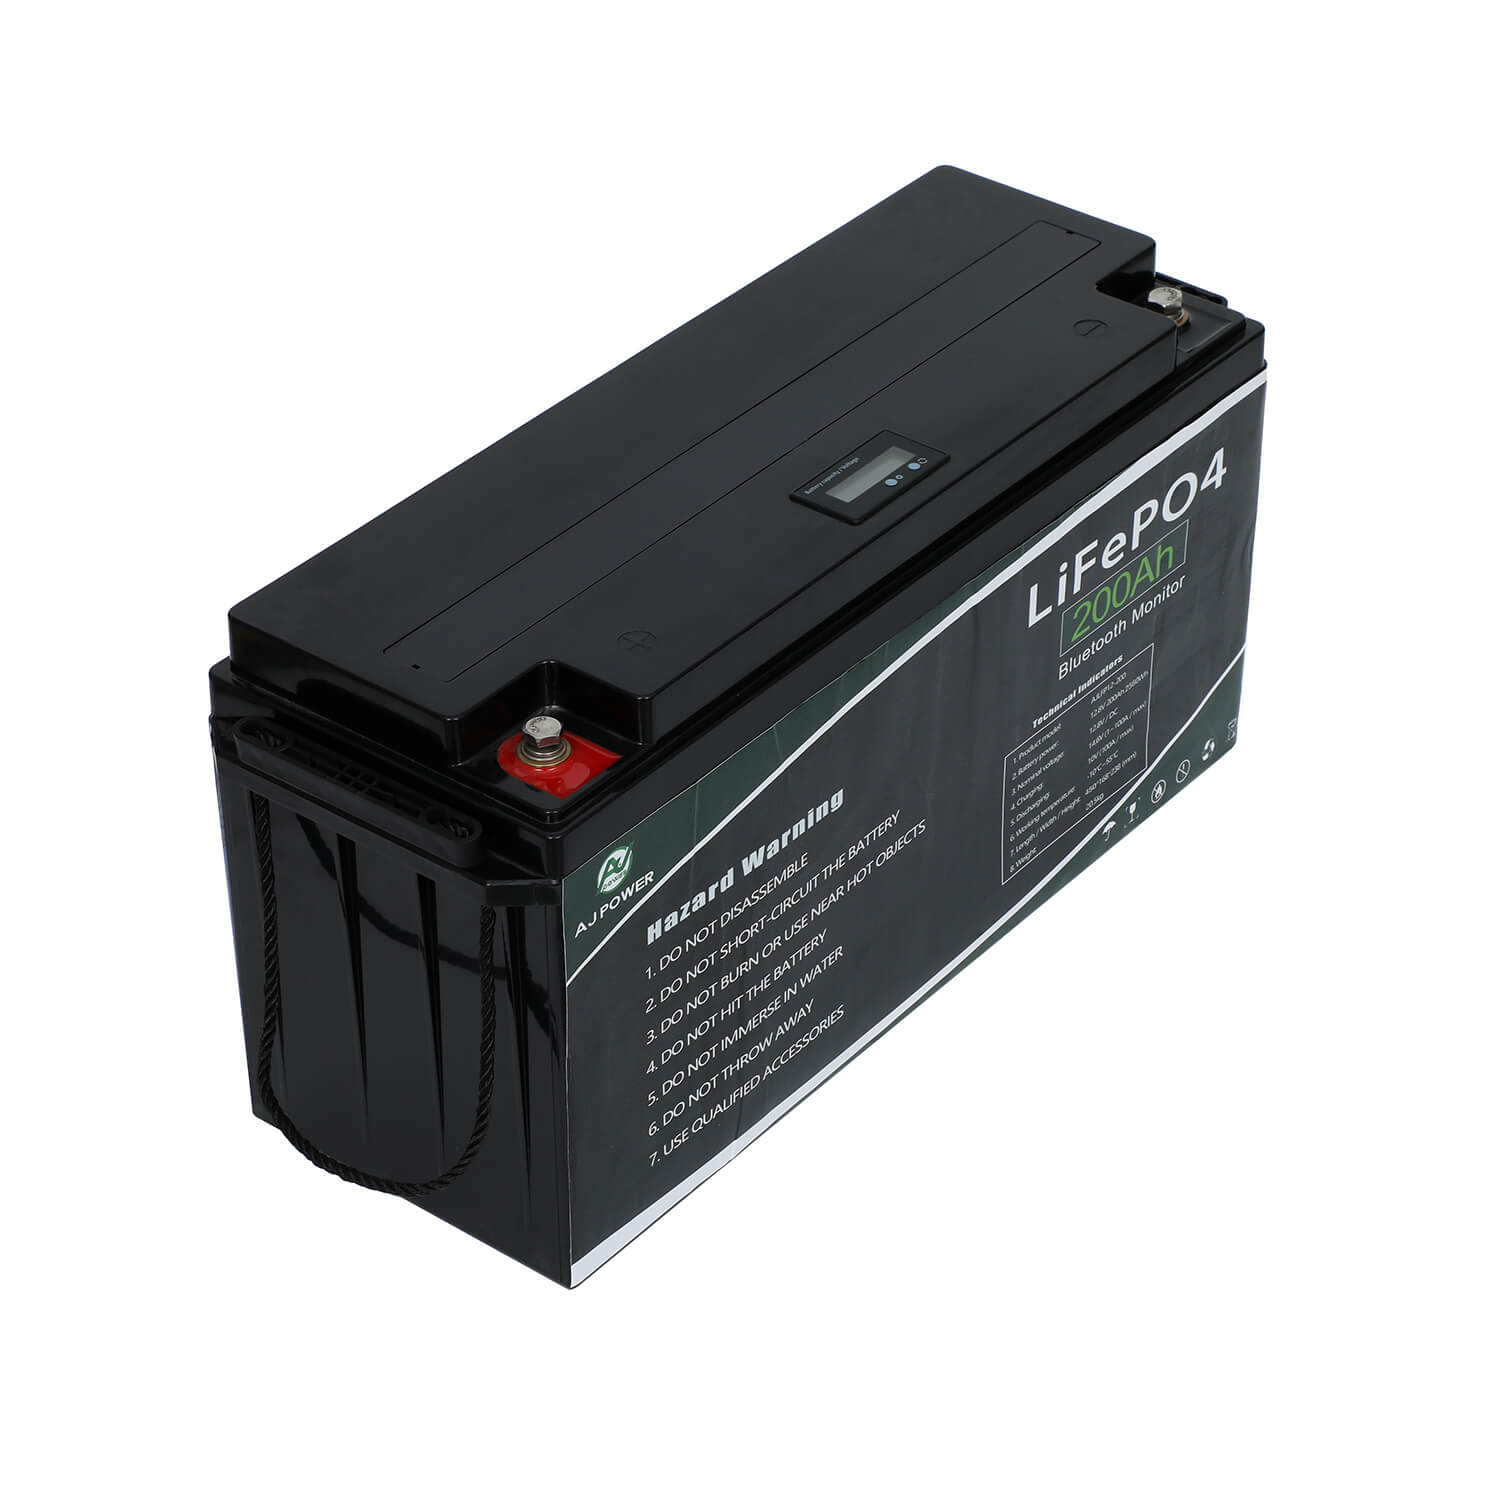 lithium iron phosphate battery charging